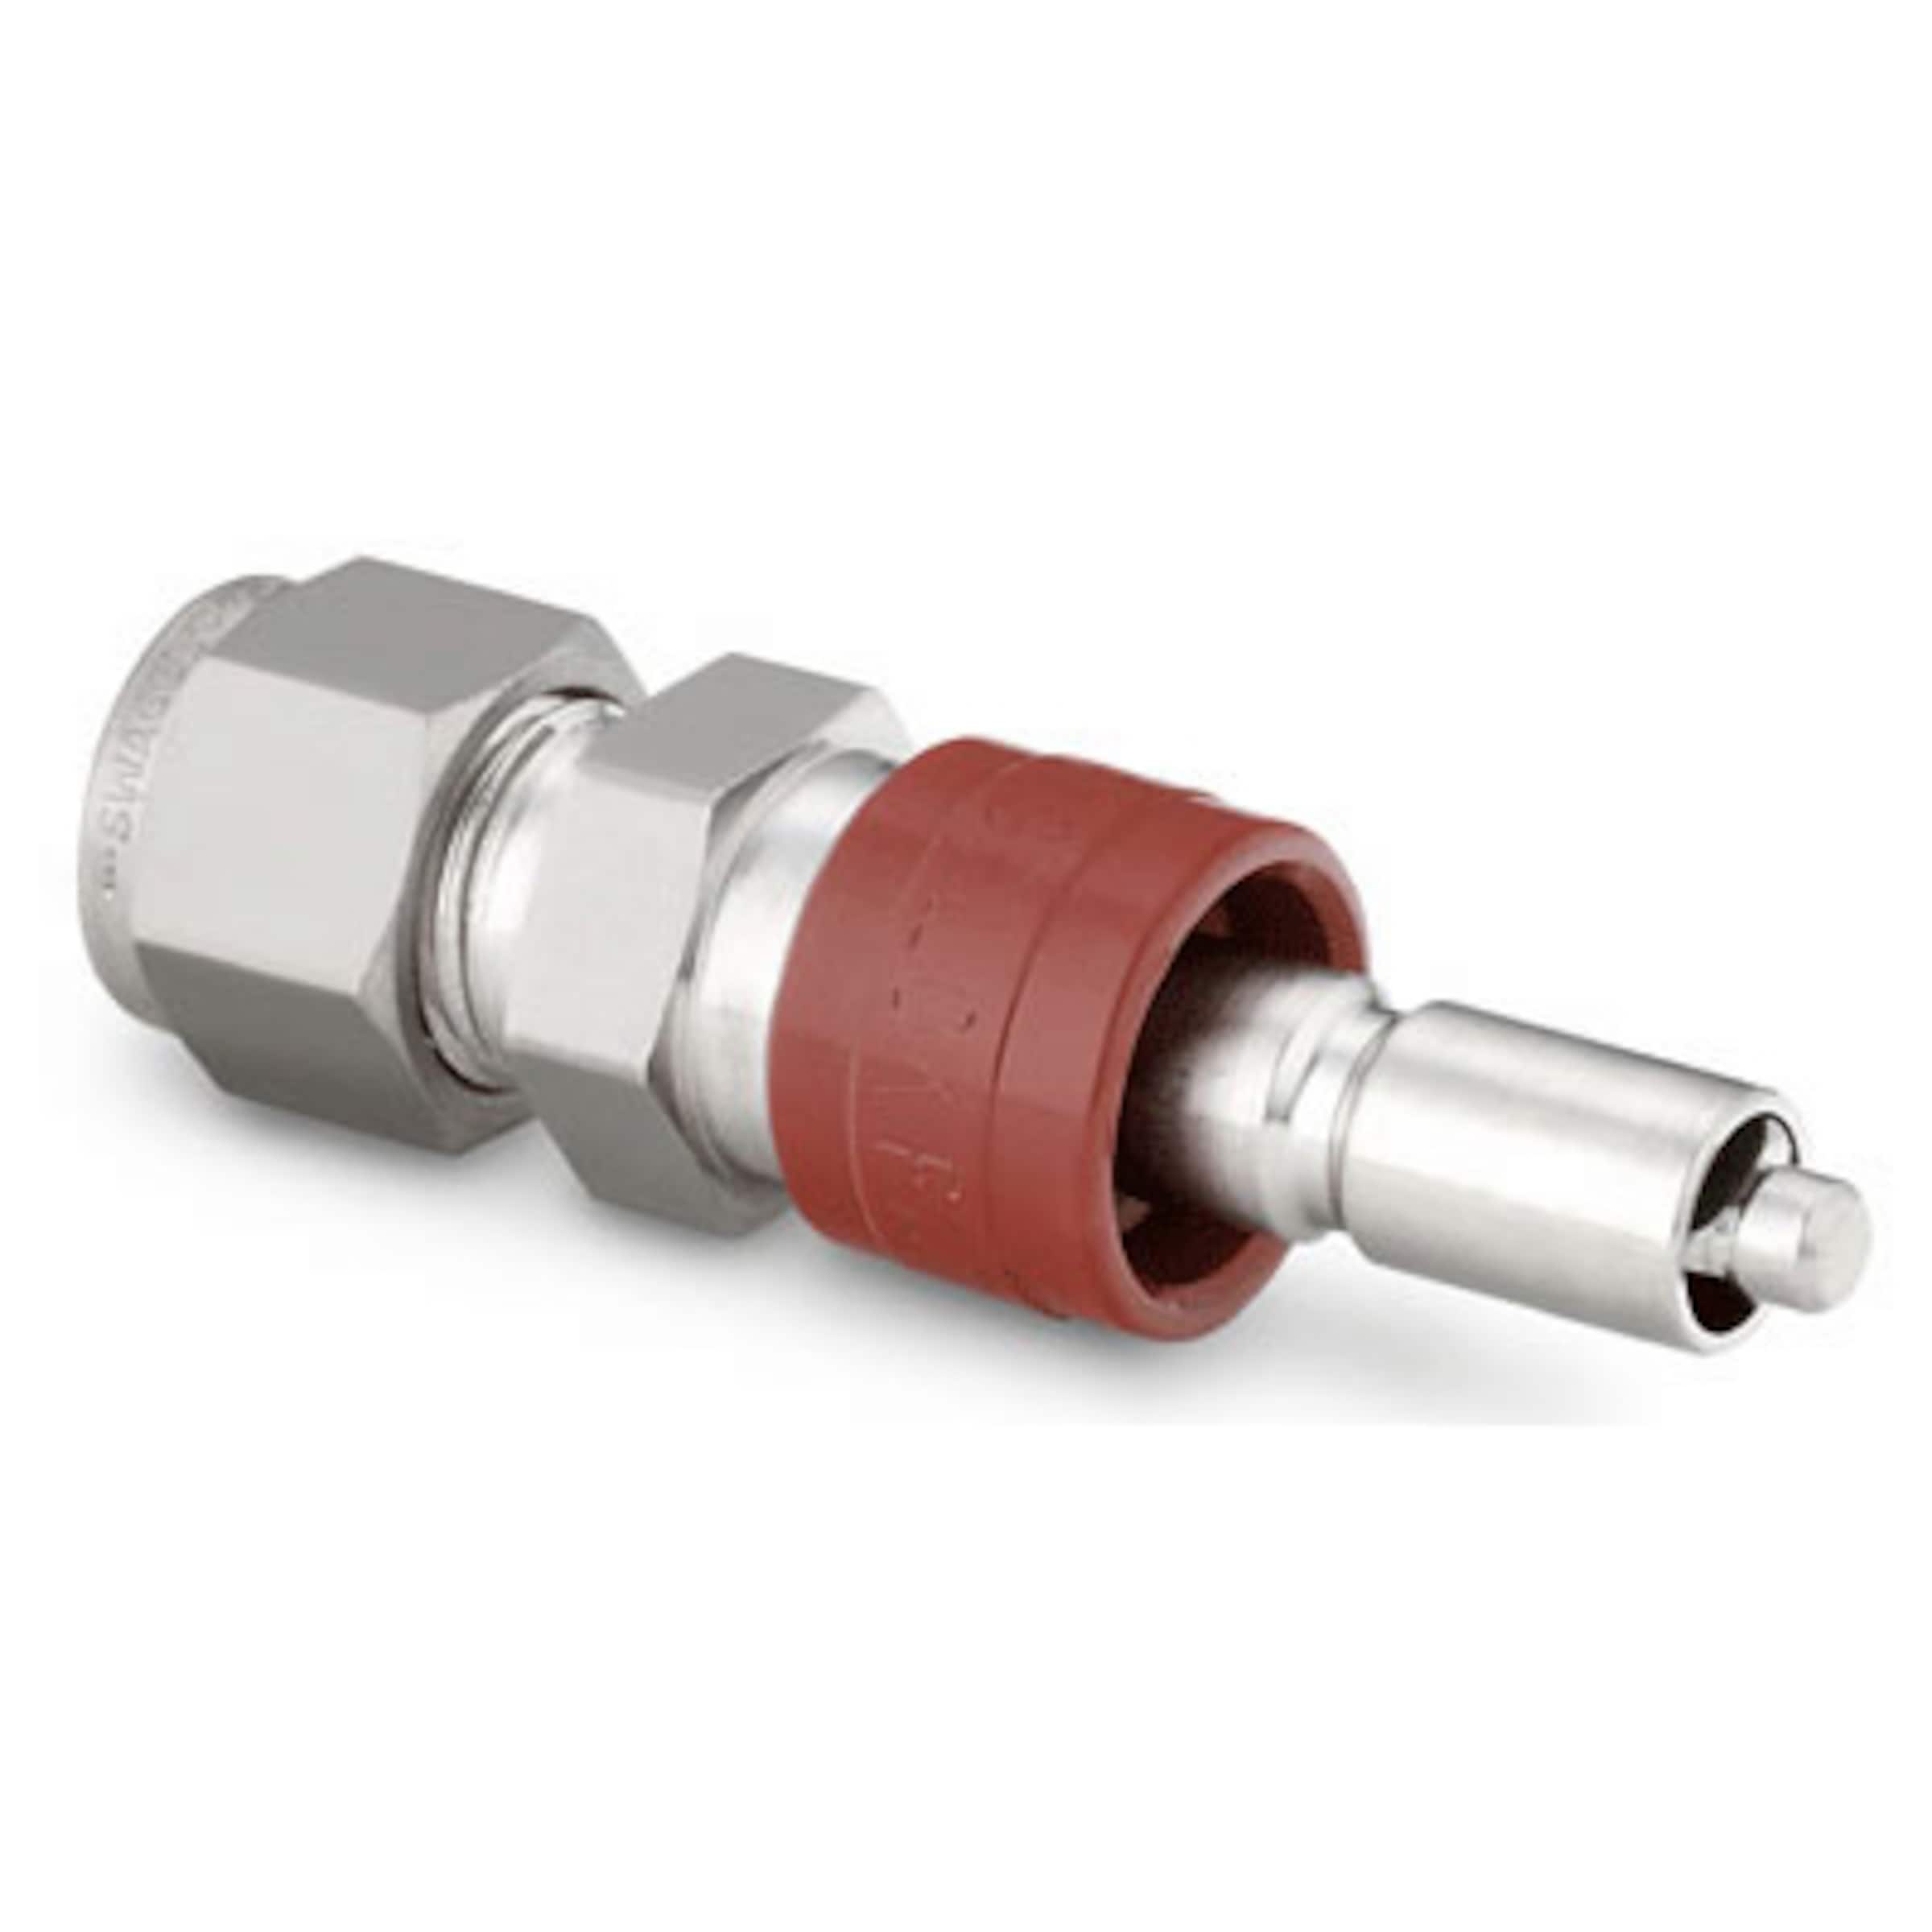 Stainless Steel Instrumentation Quick Connect Stem with Valve, 0.2 Cv, 1/4  in. Swagelok Tube Fitting, Instrumentation Quick Connects, Quick Connects, Valves, All Products